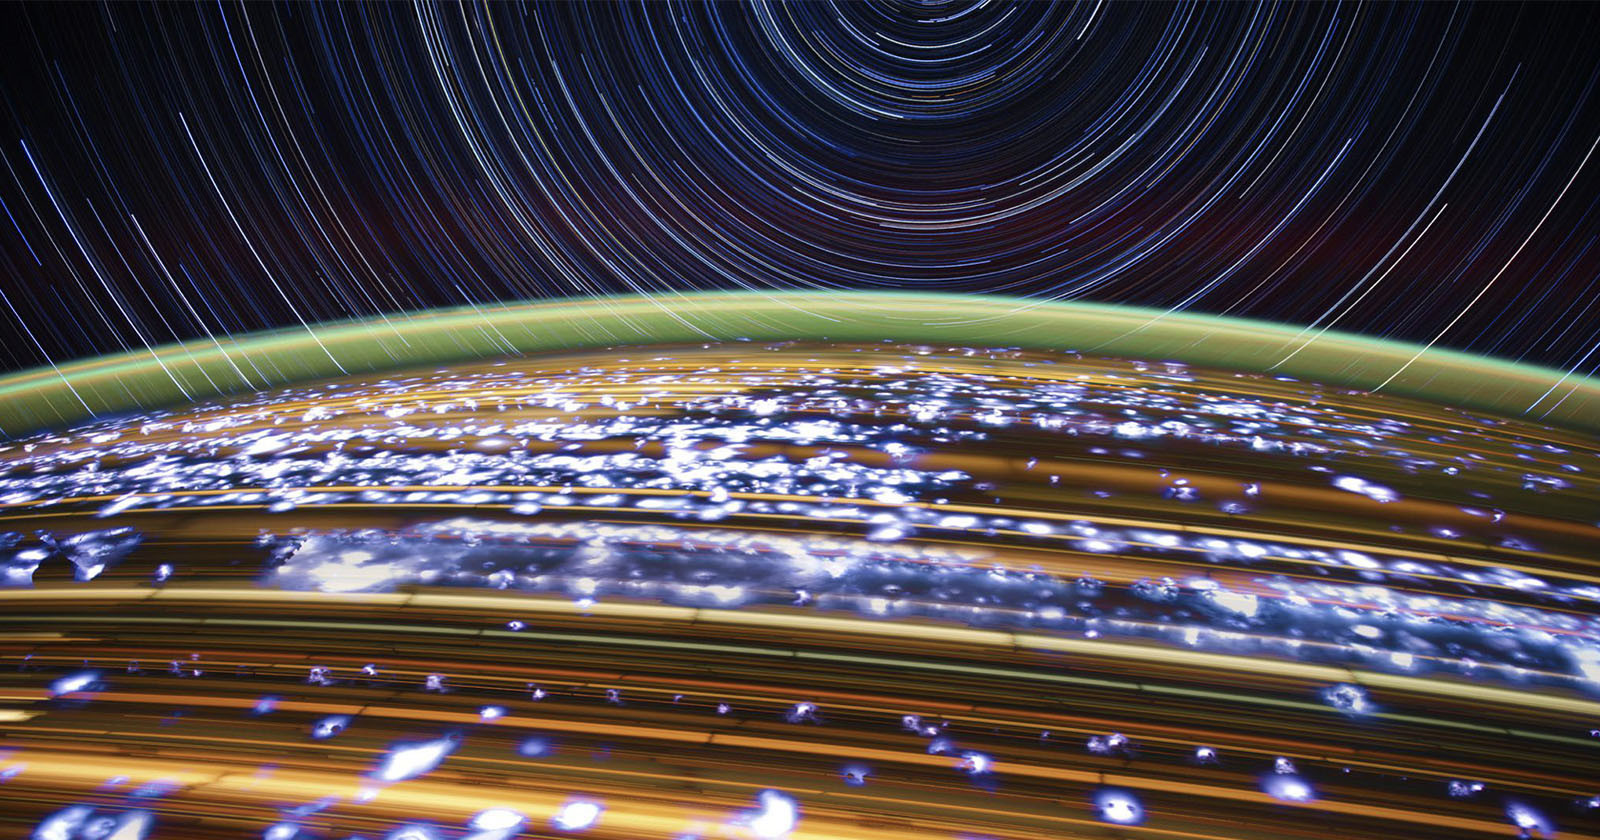  astronaut shares incredible star trail lightning photo 